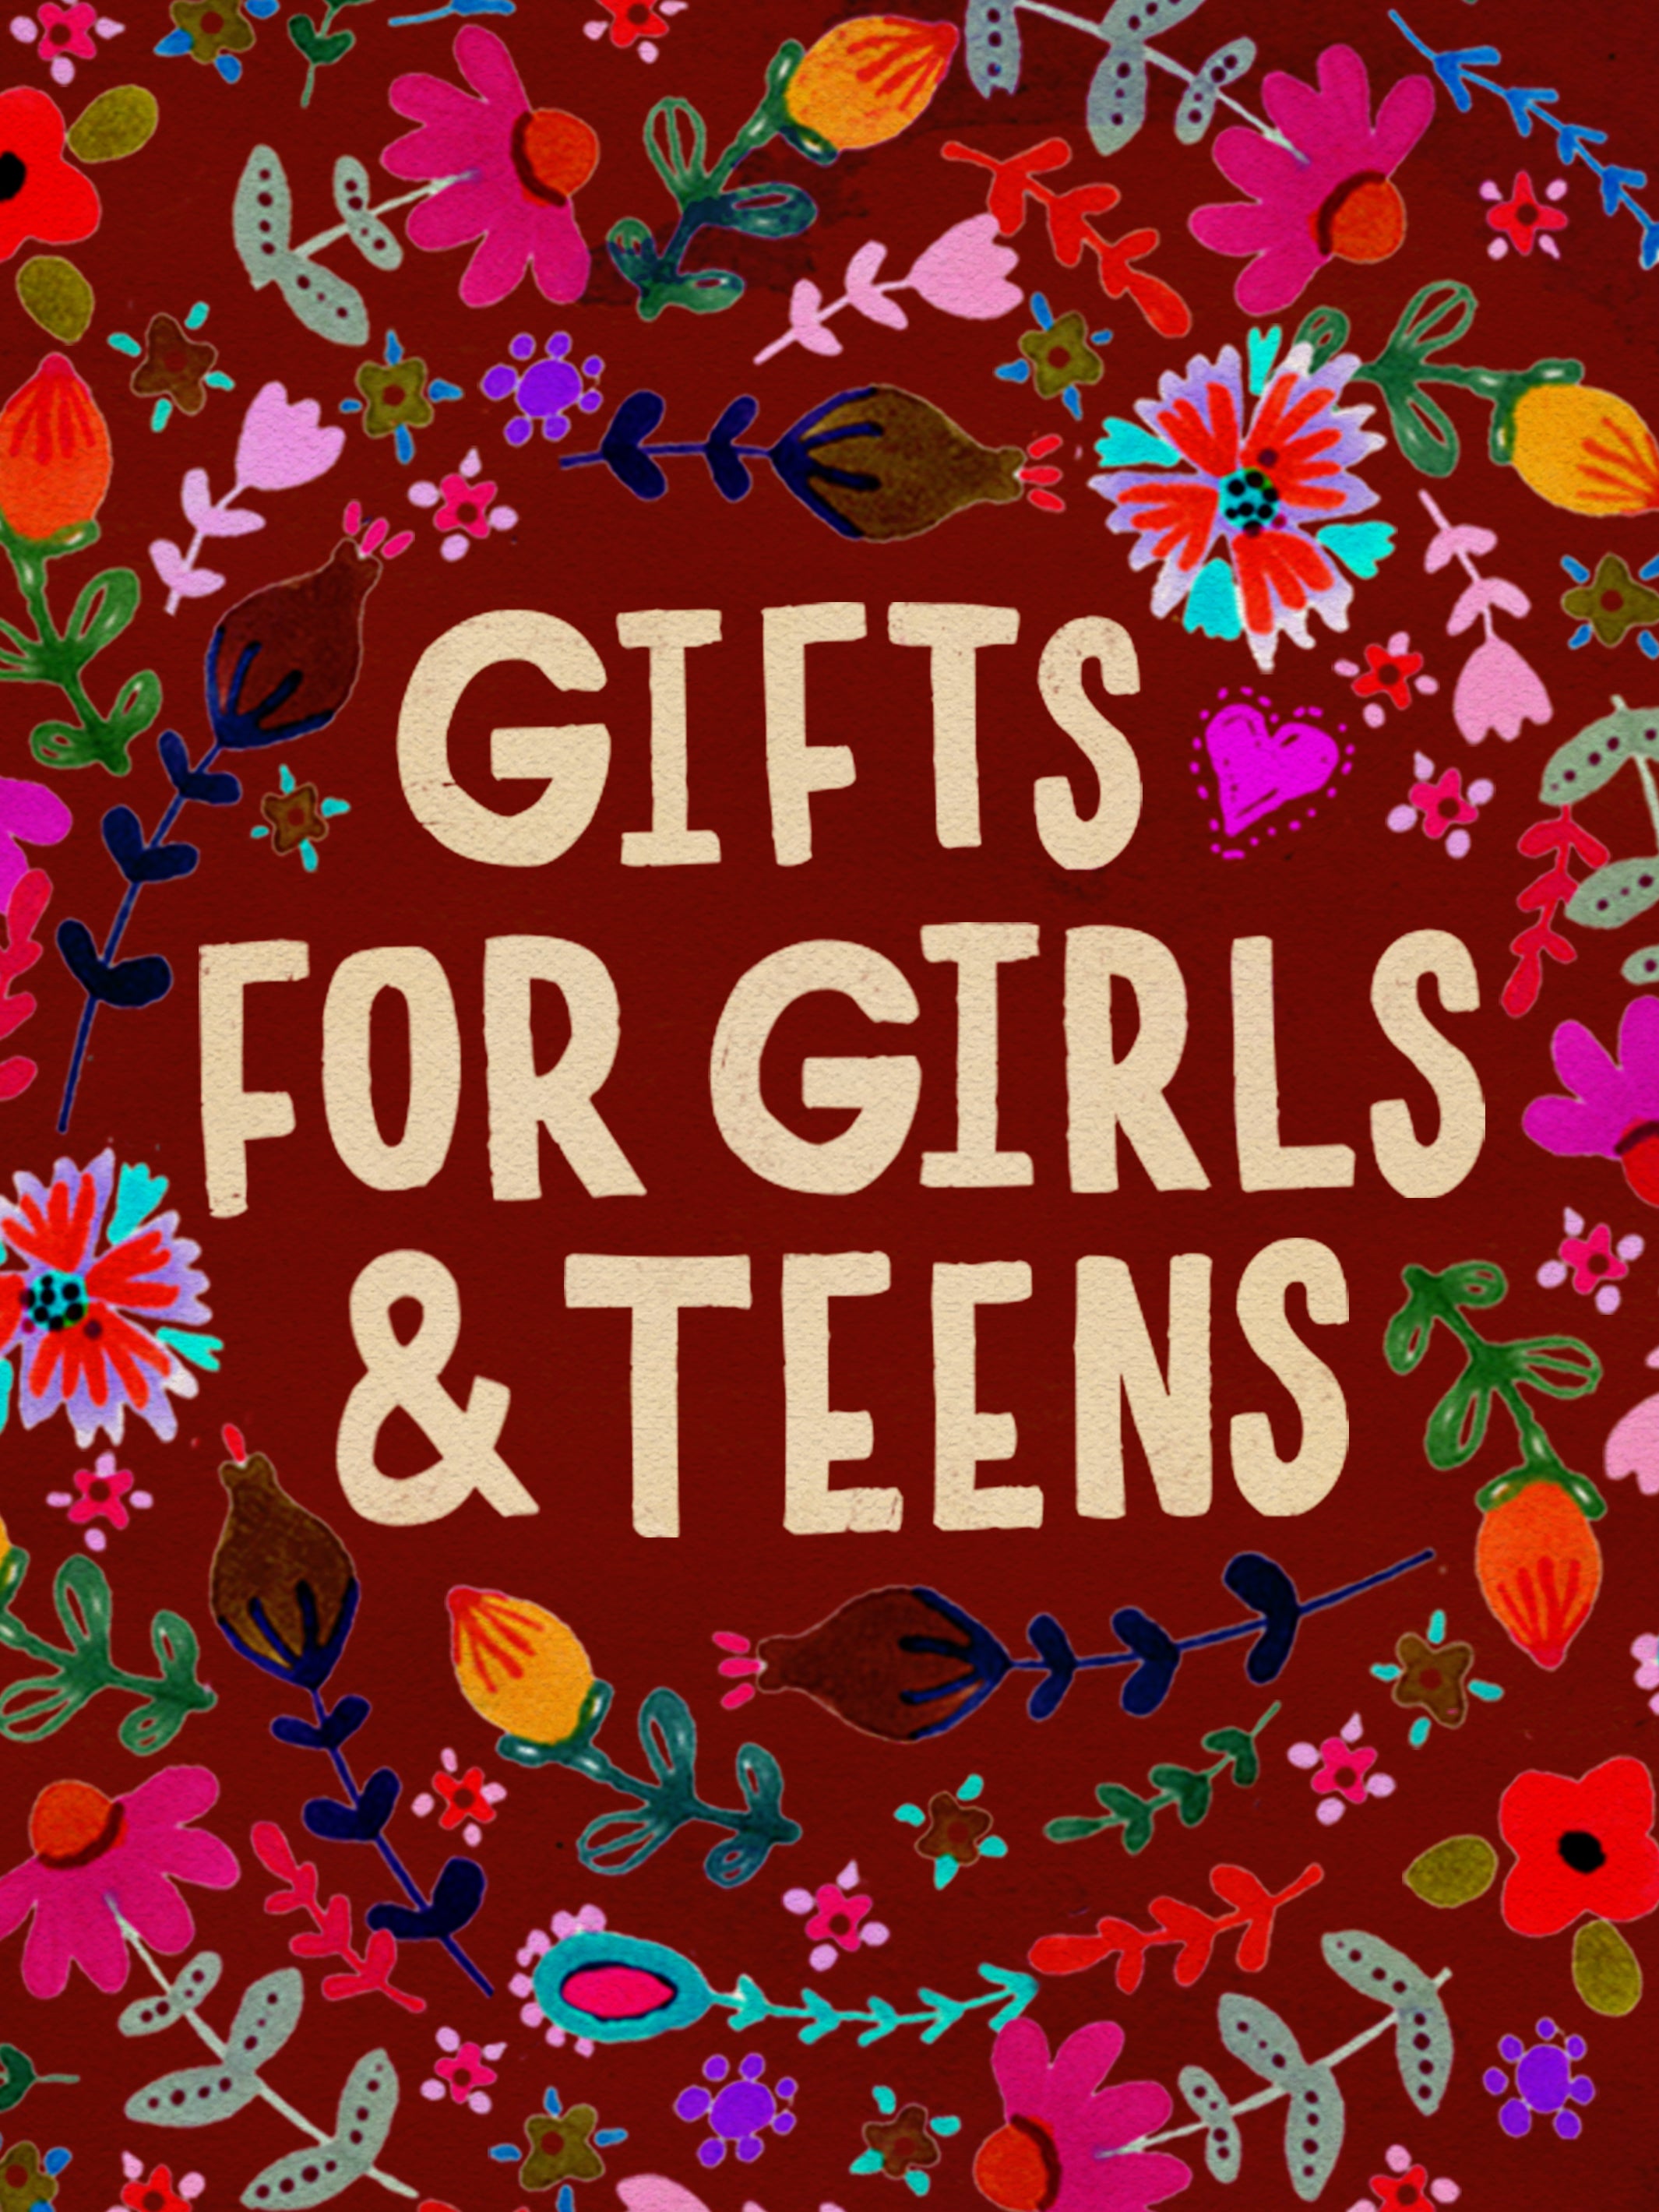 Gifts for Girls & Teens